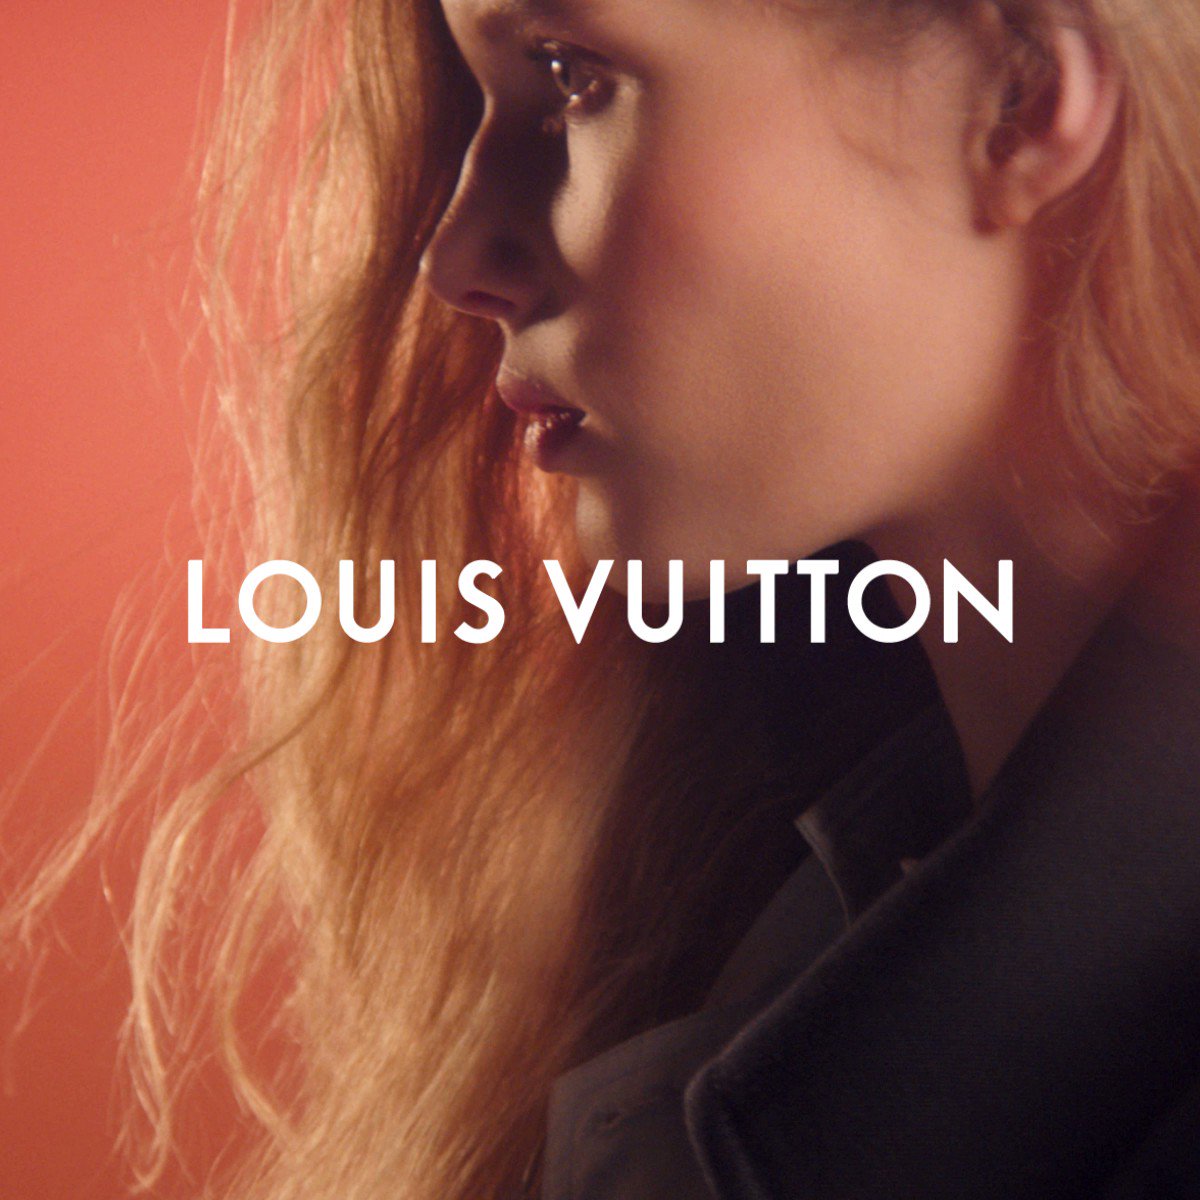 Louis Vuitton on X: Striking perspectives. Showcasing the